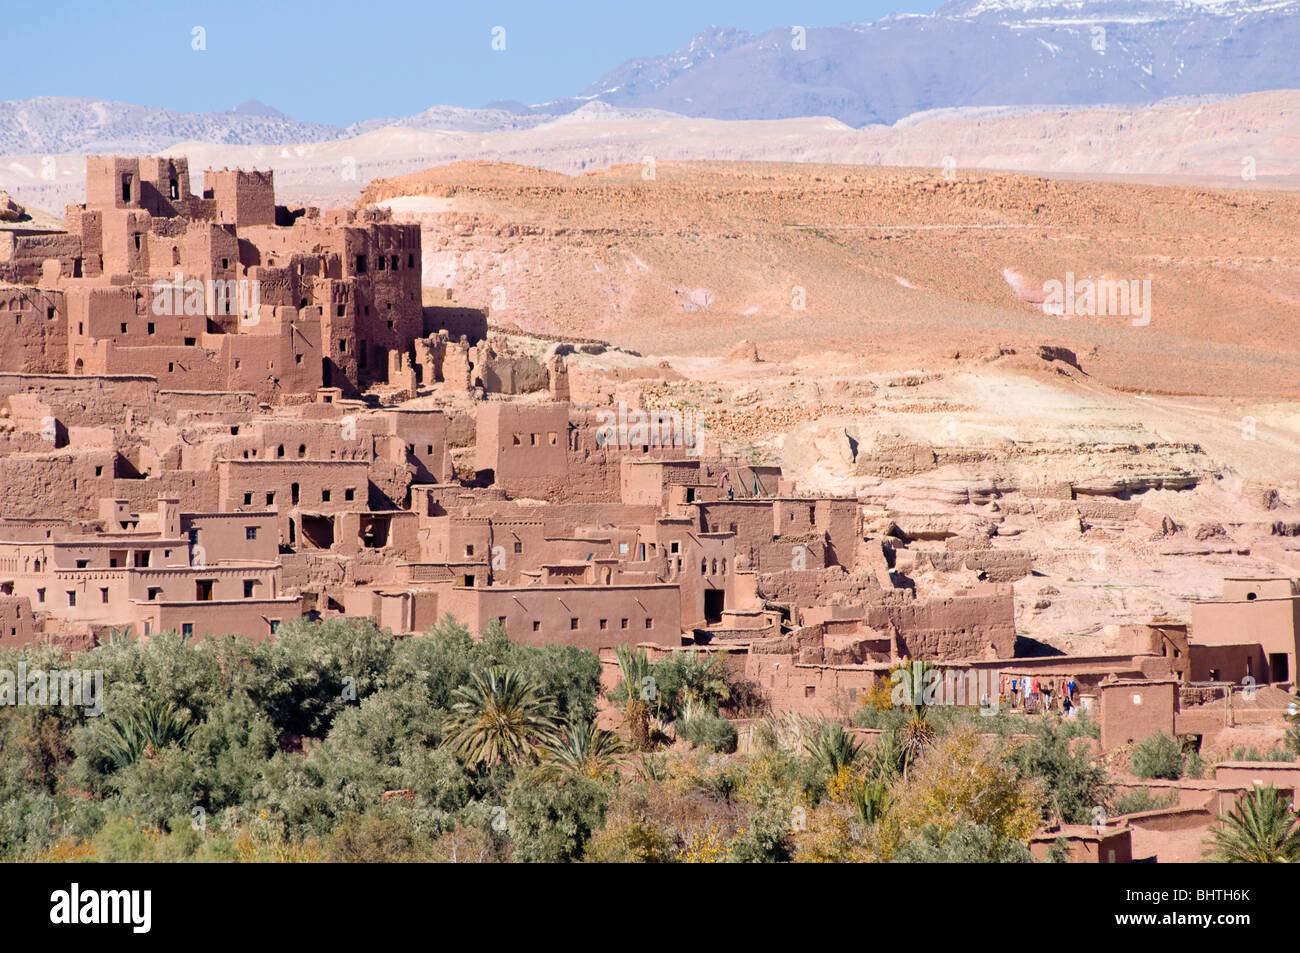 The military fortress at Ait Benhaddou, Morocco Stock Photo